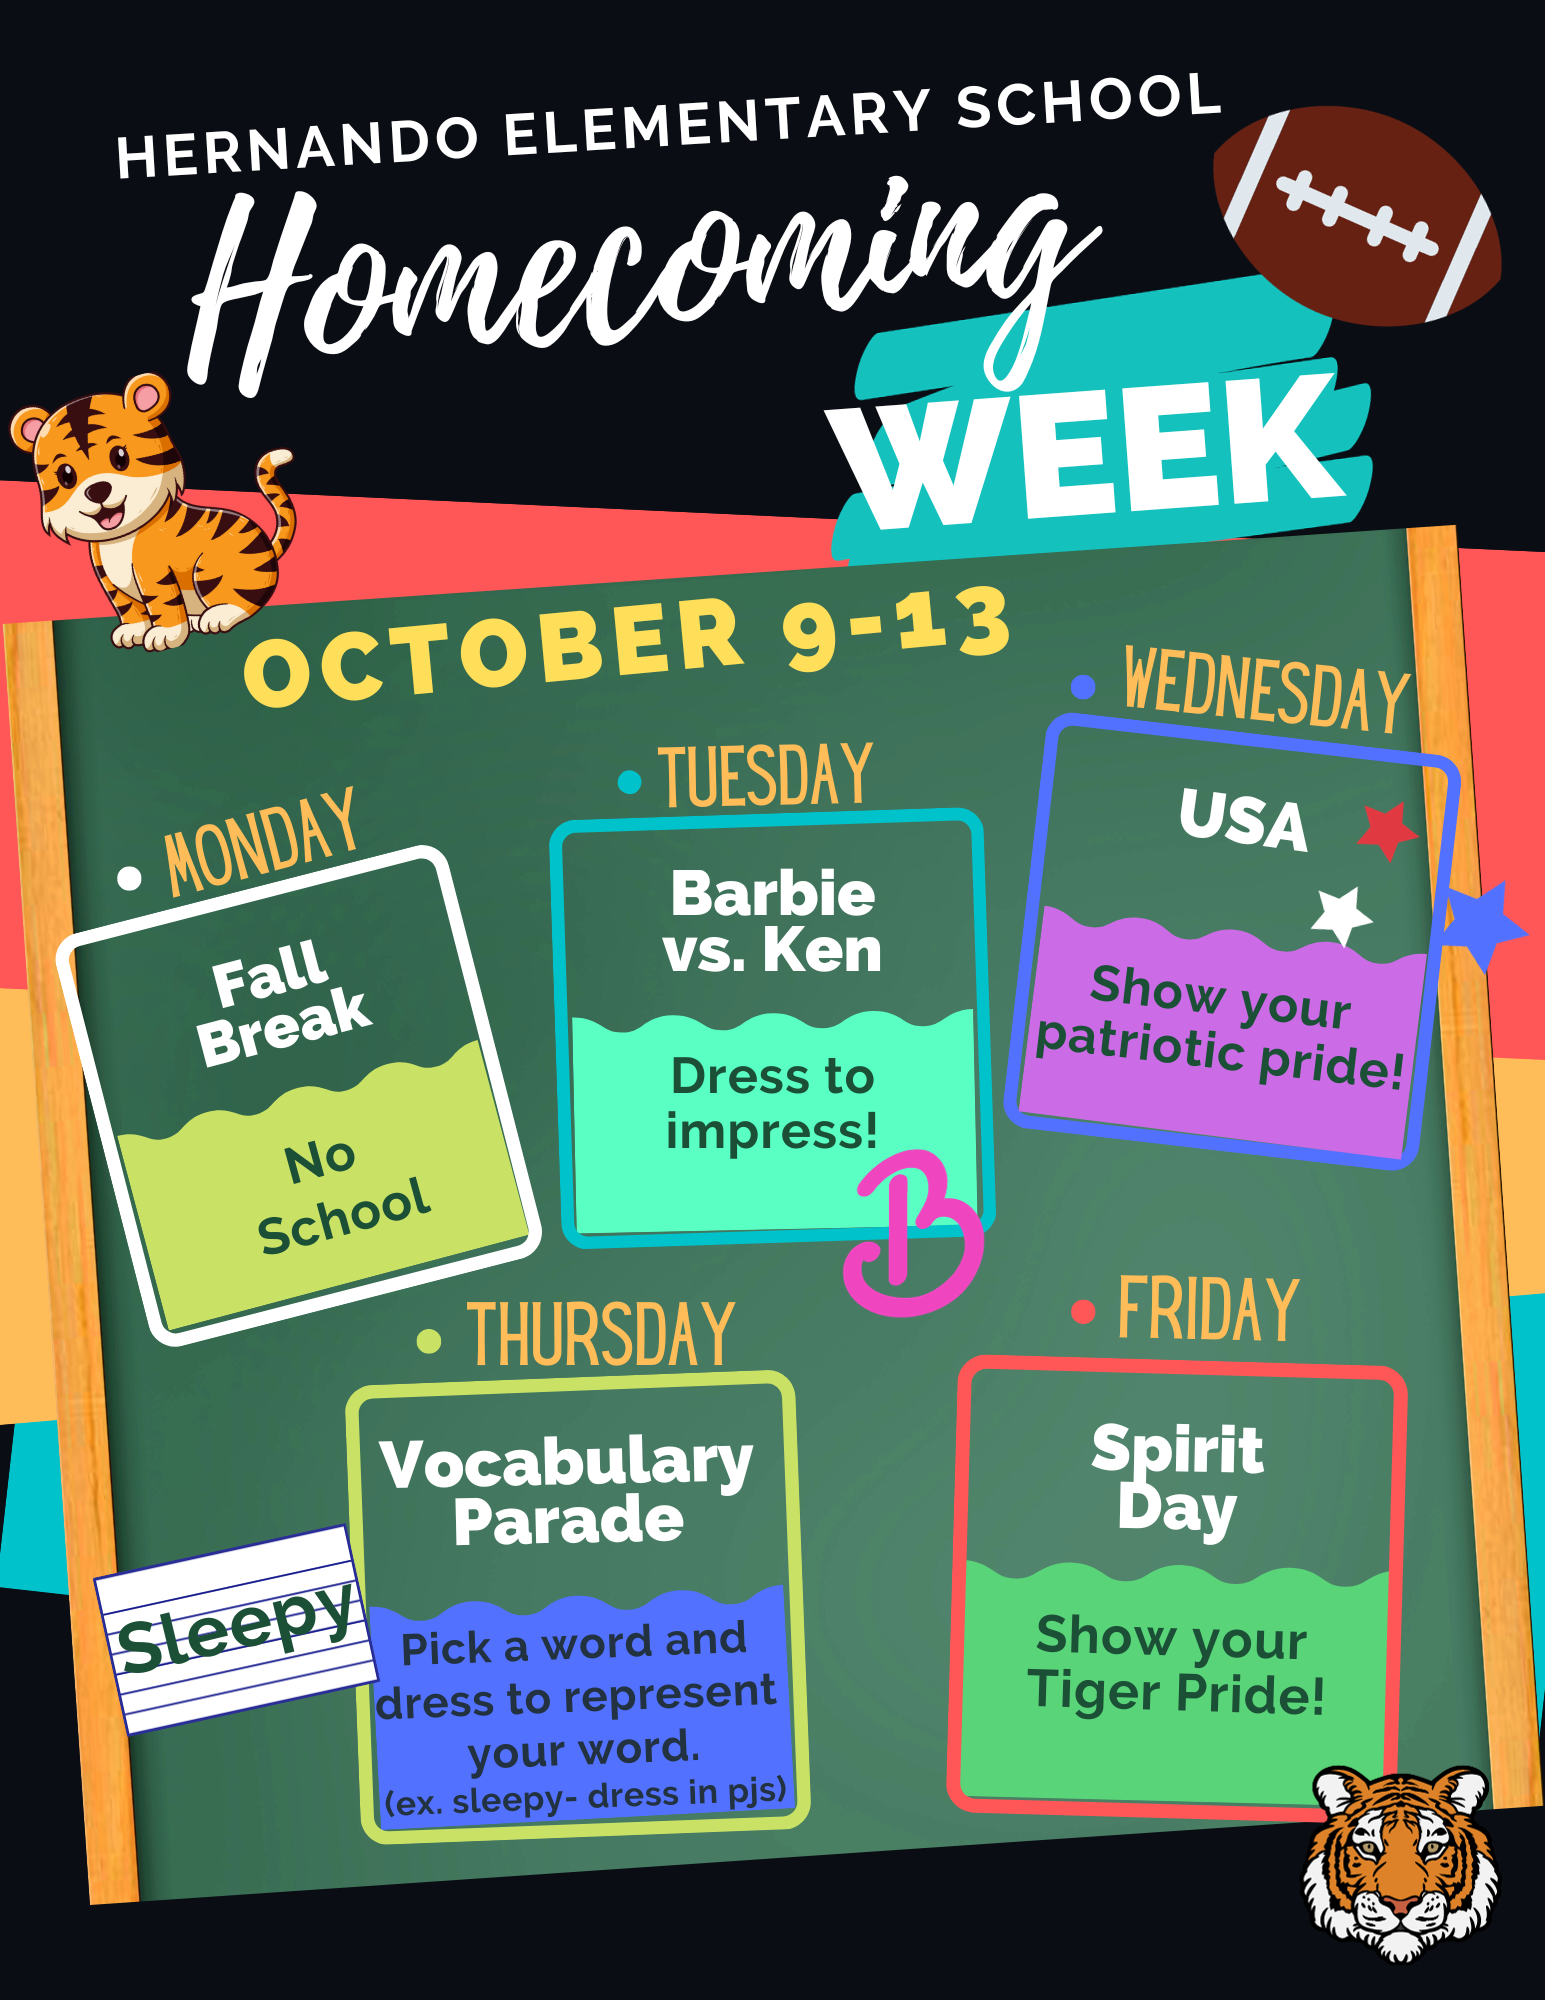 HES Homecoming Week - Oct 9-13, Monday - No School (Fall Break), Tuesday - Barbie vs. Ken, Wed - USA Show Your pride, Thurs. - Vocab Parade, Friday - Show Your Tiger Pride